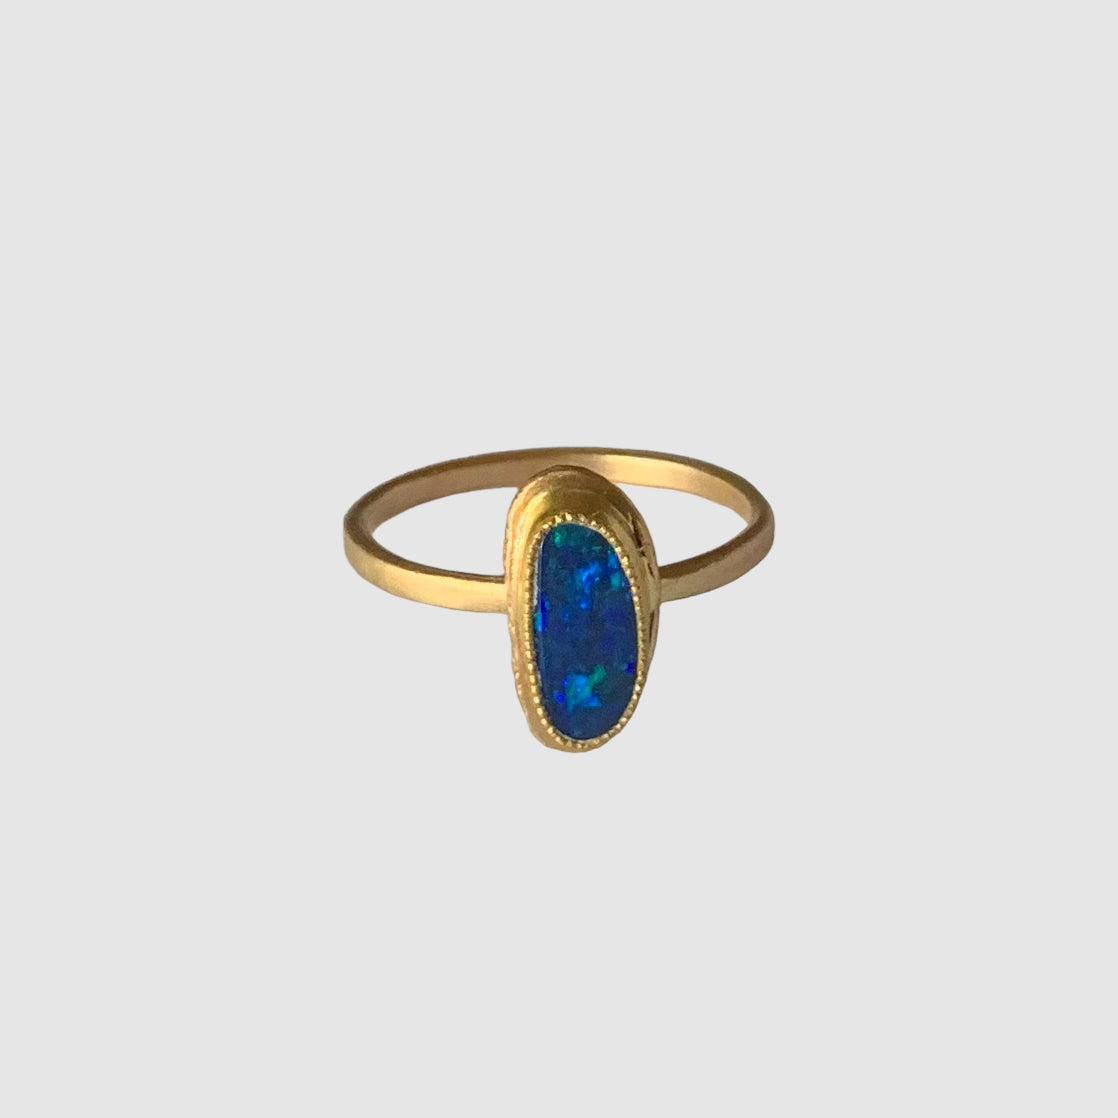 HEIRLOOM RING // SIMPLE // GOLD // BLUE OPAL